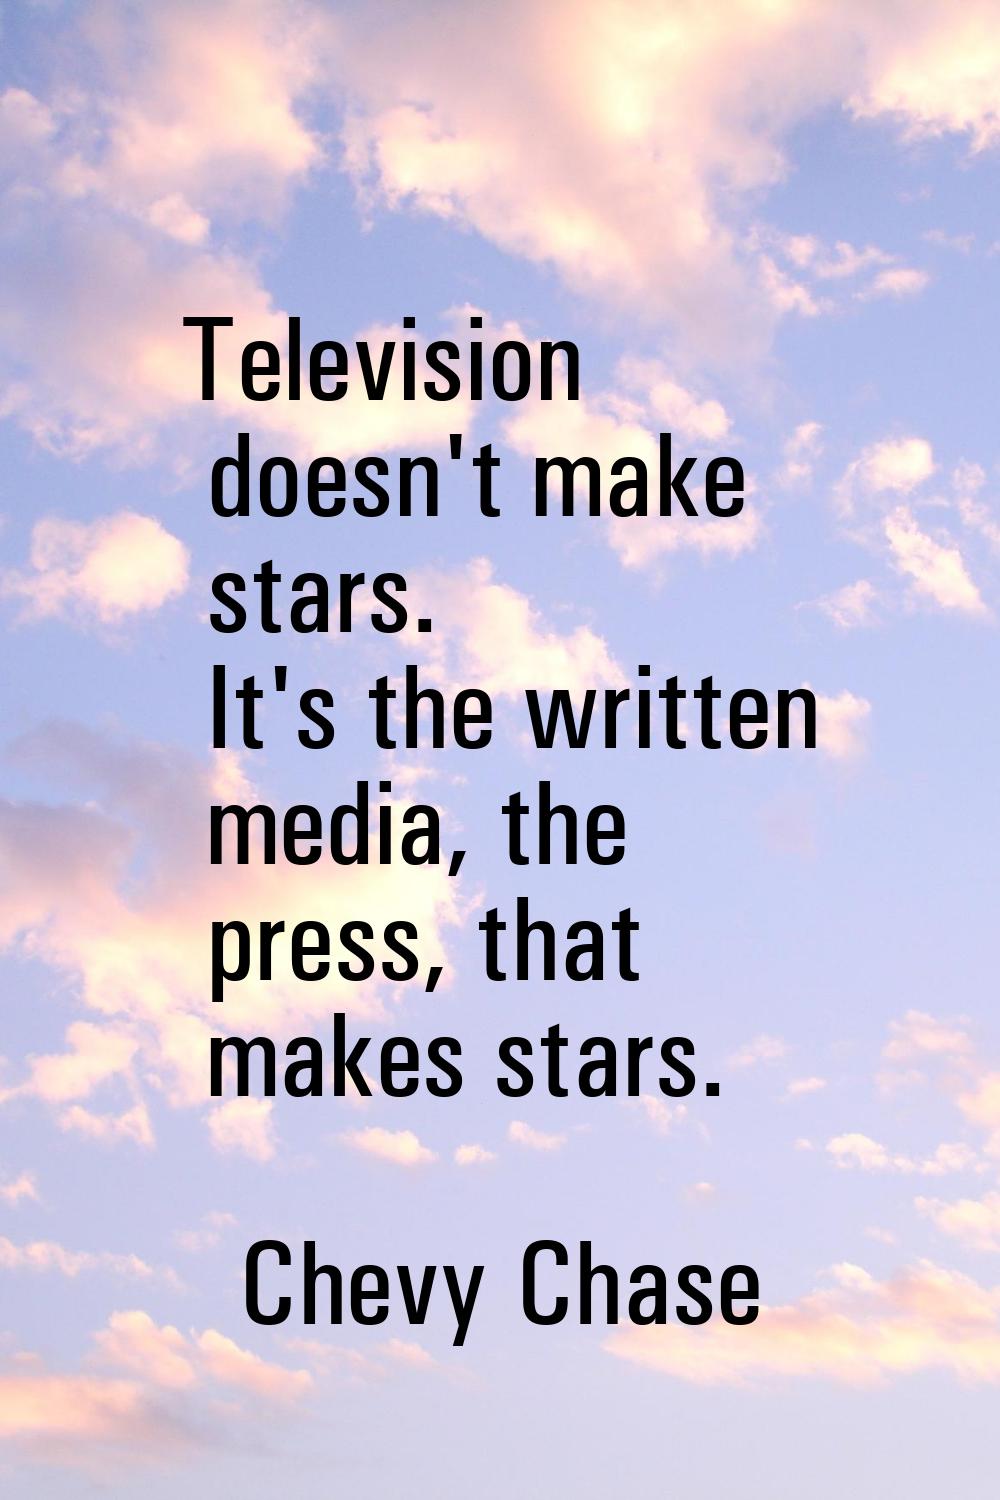 Television doesn't make stars. It's the written media, the press, that makes stars.